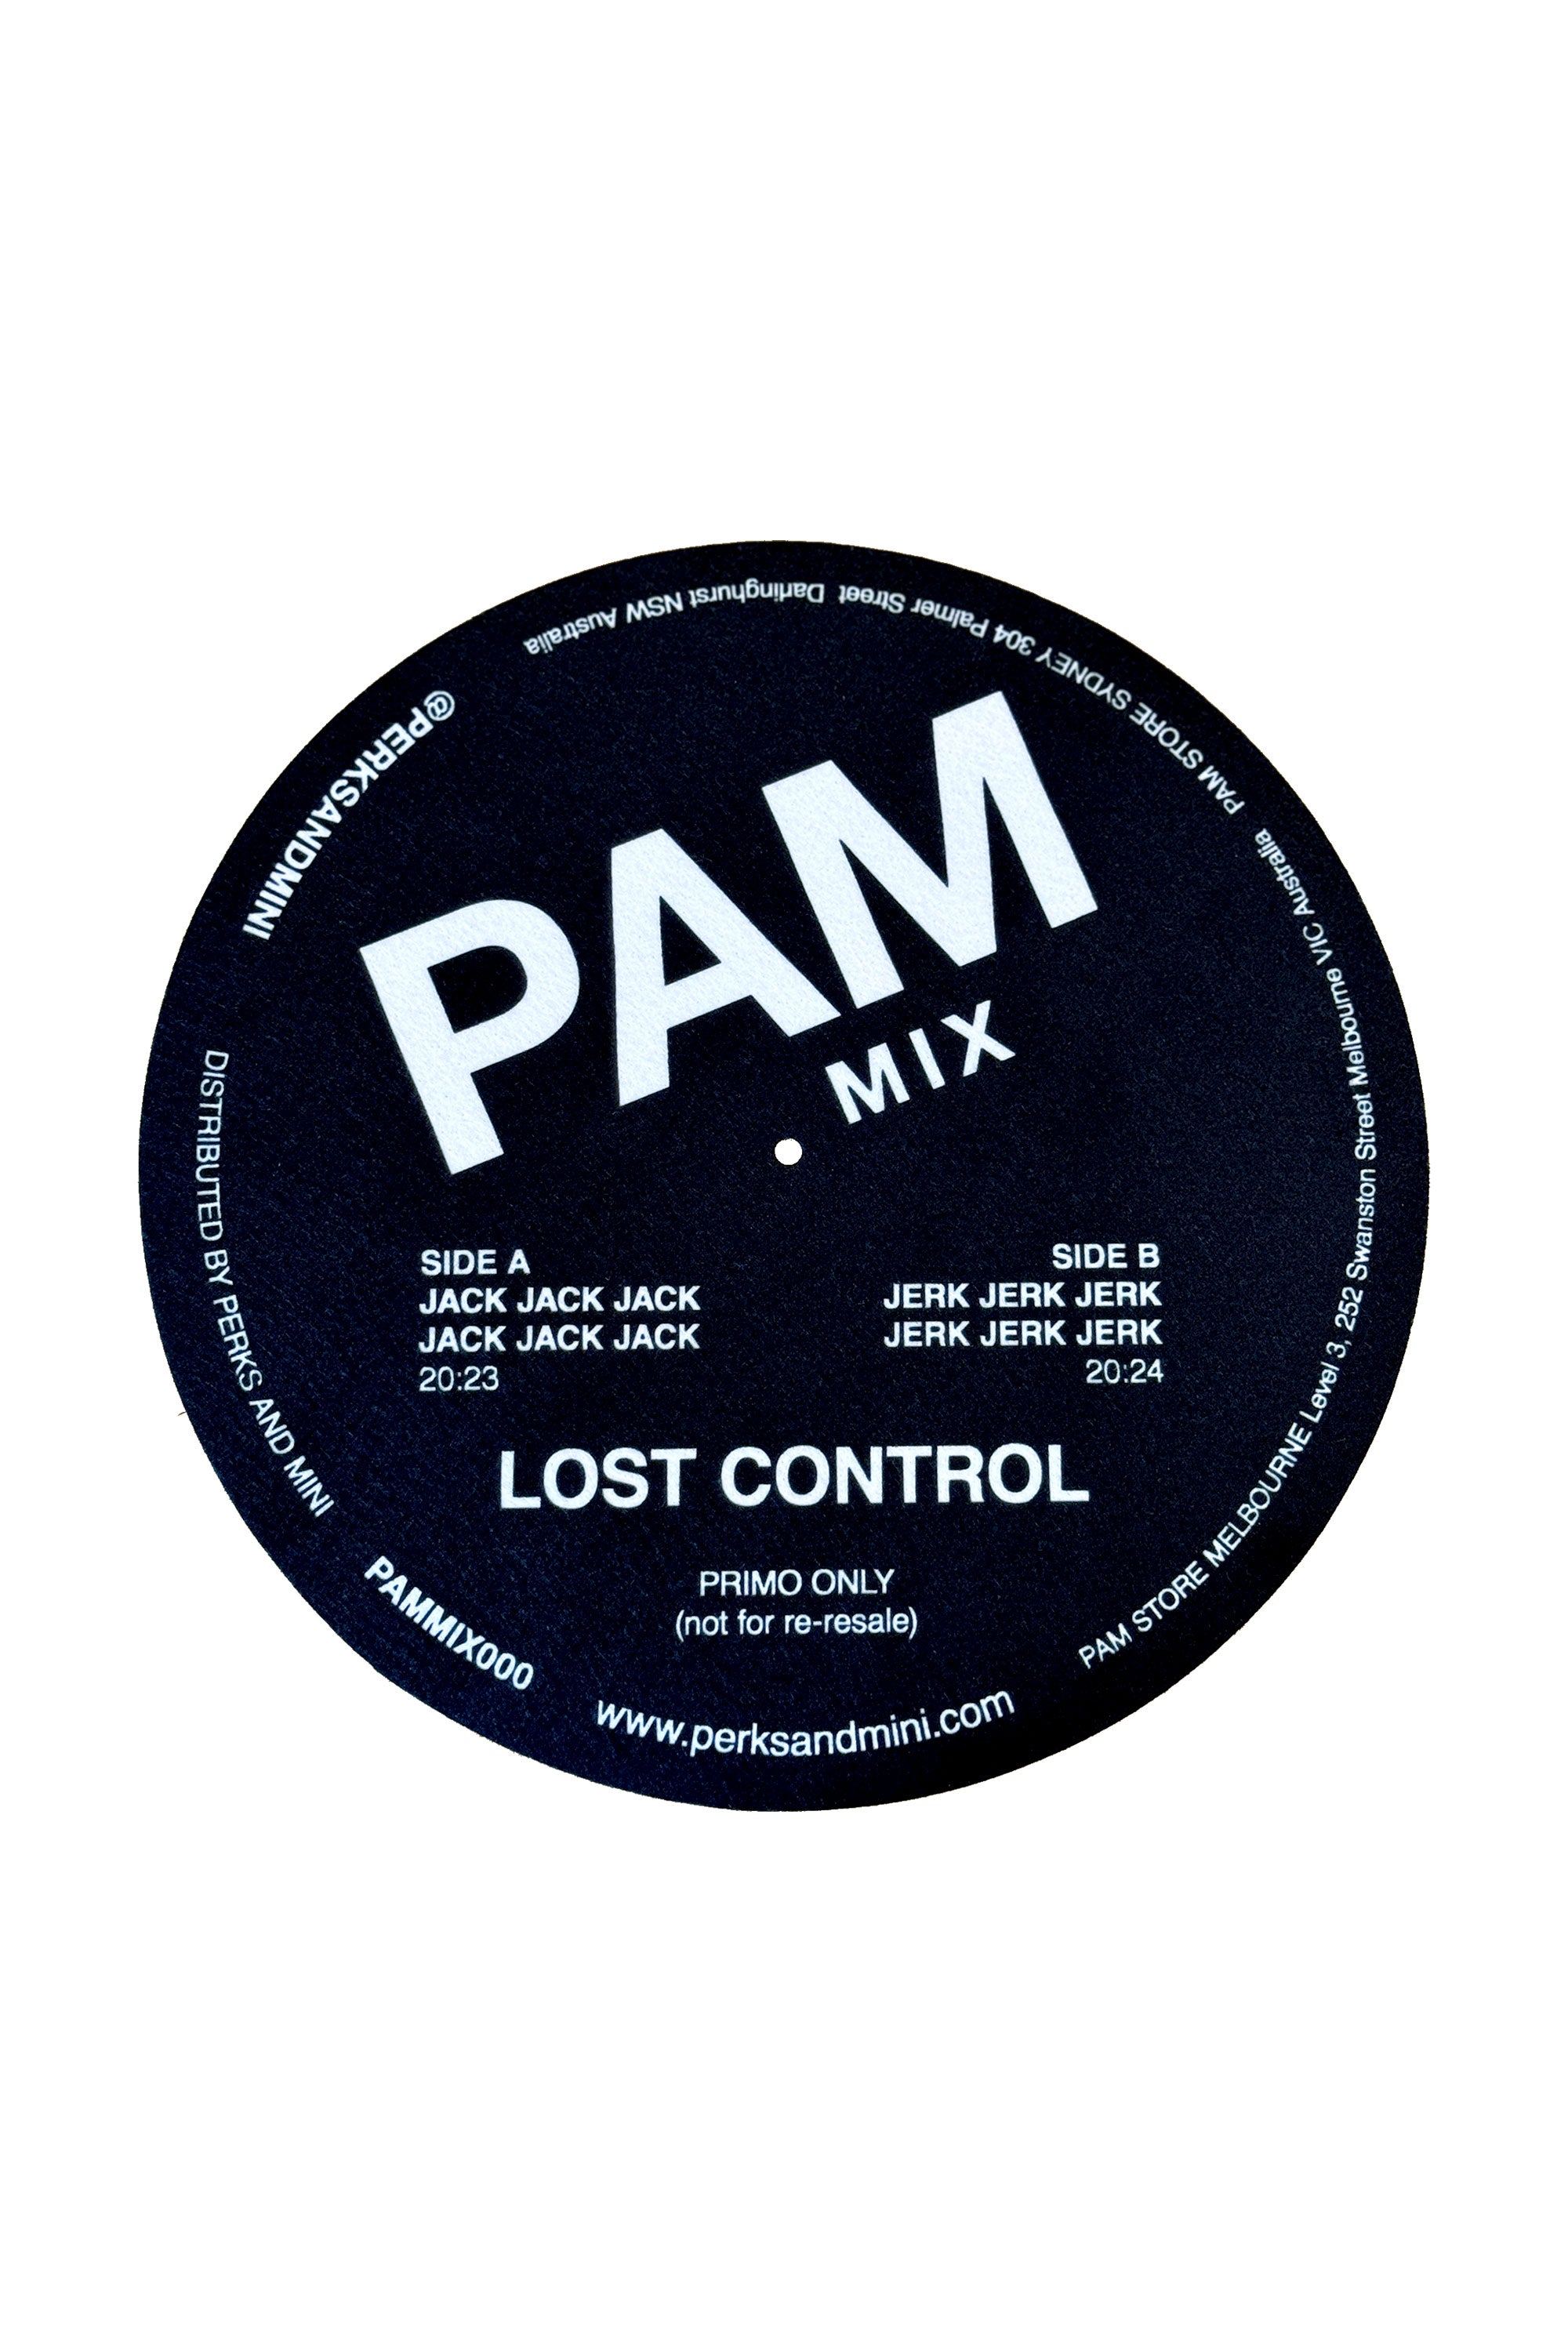 The PAMMIX 'LOST CONTROL' SLIPMAT MULTI available online with global shipping, and in PAM Stores Melbourne and Sydney.